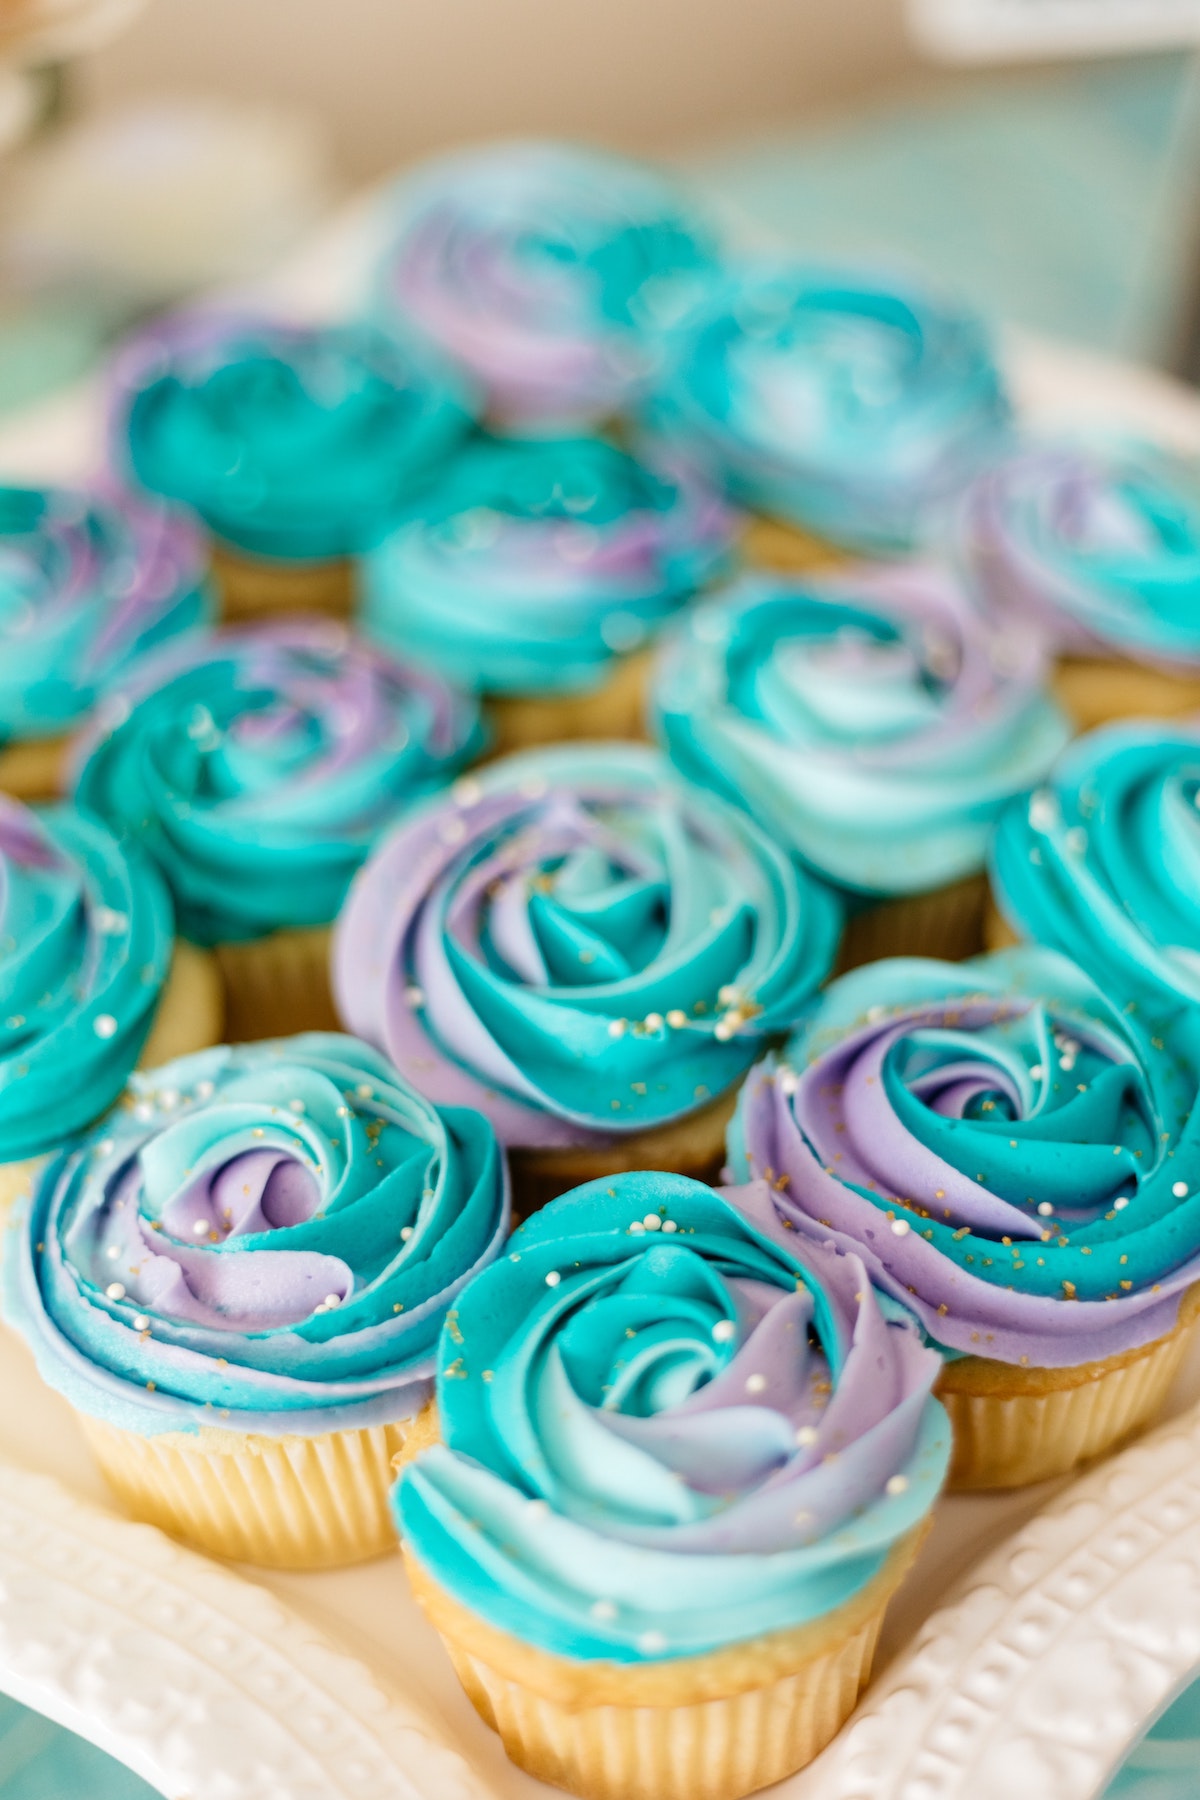 Tray of white cupcakes decorated with purple and blue frosting.